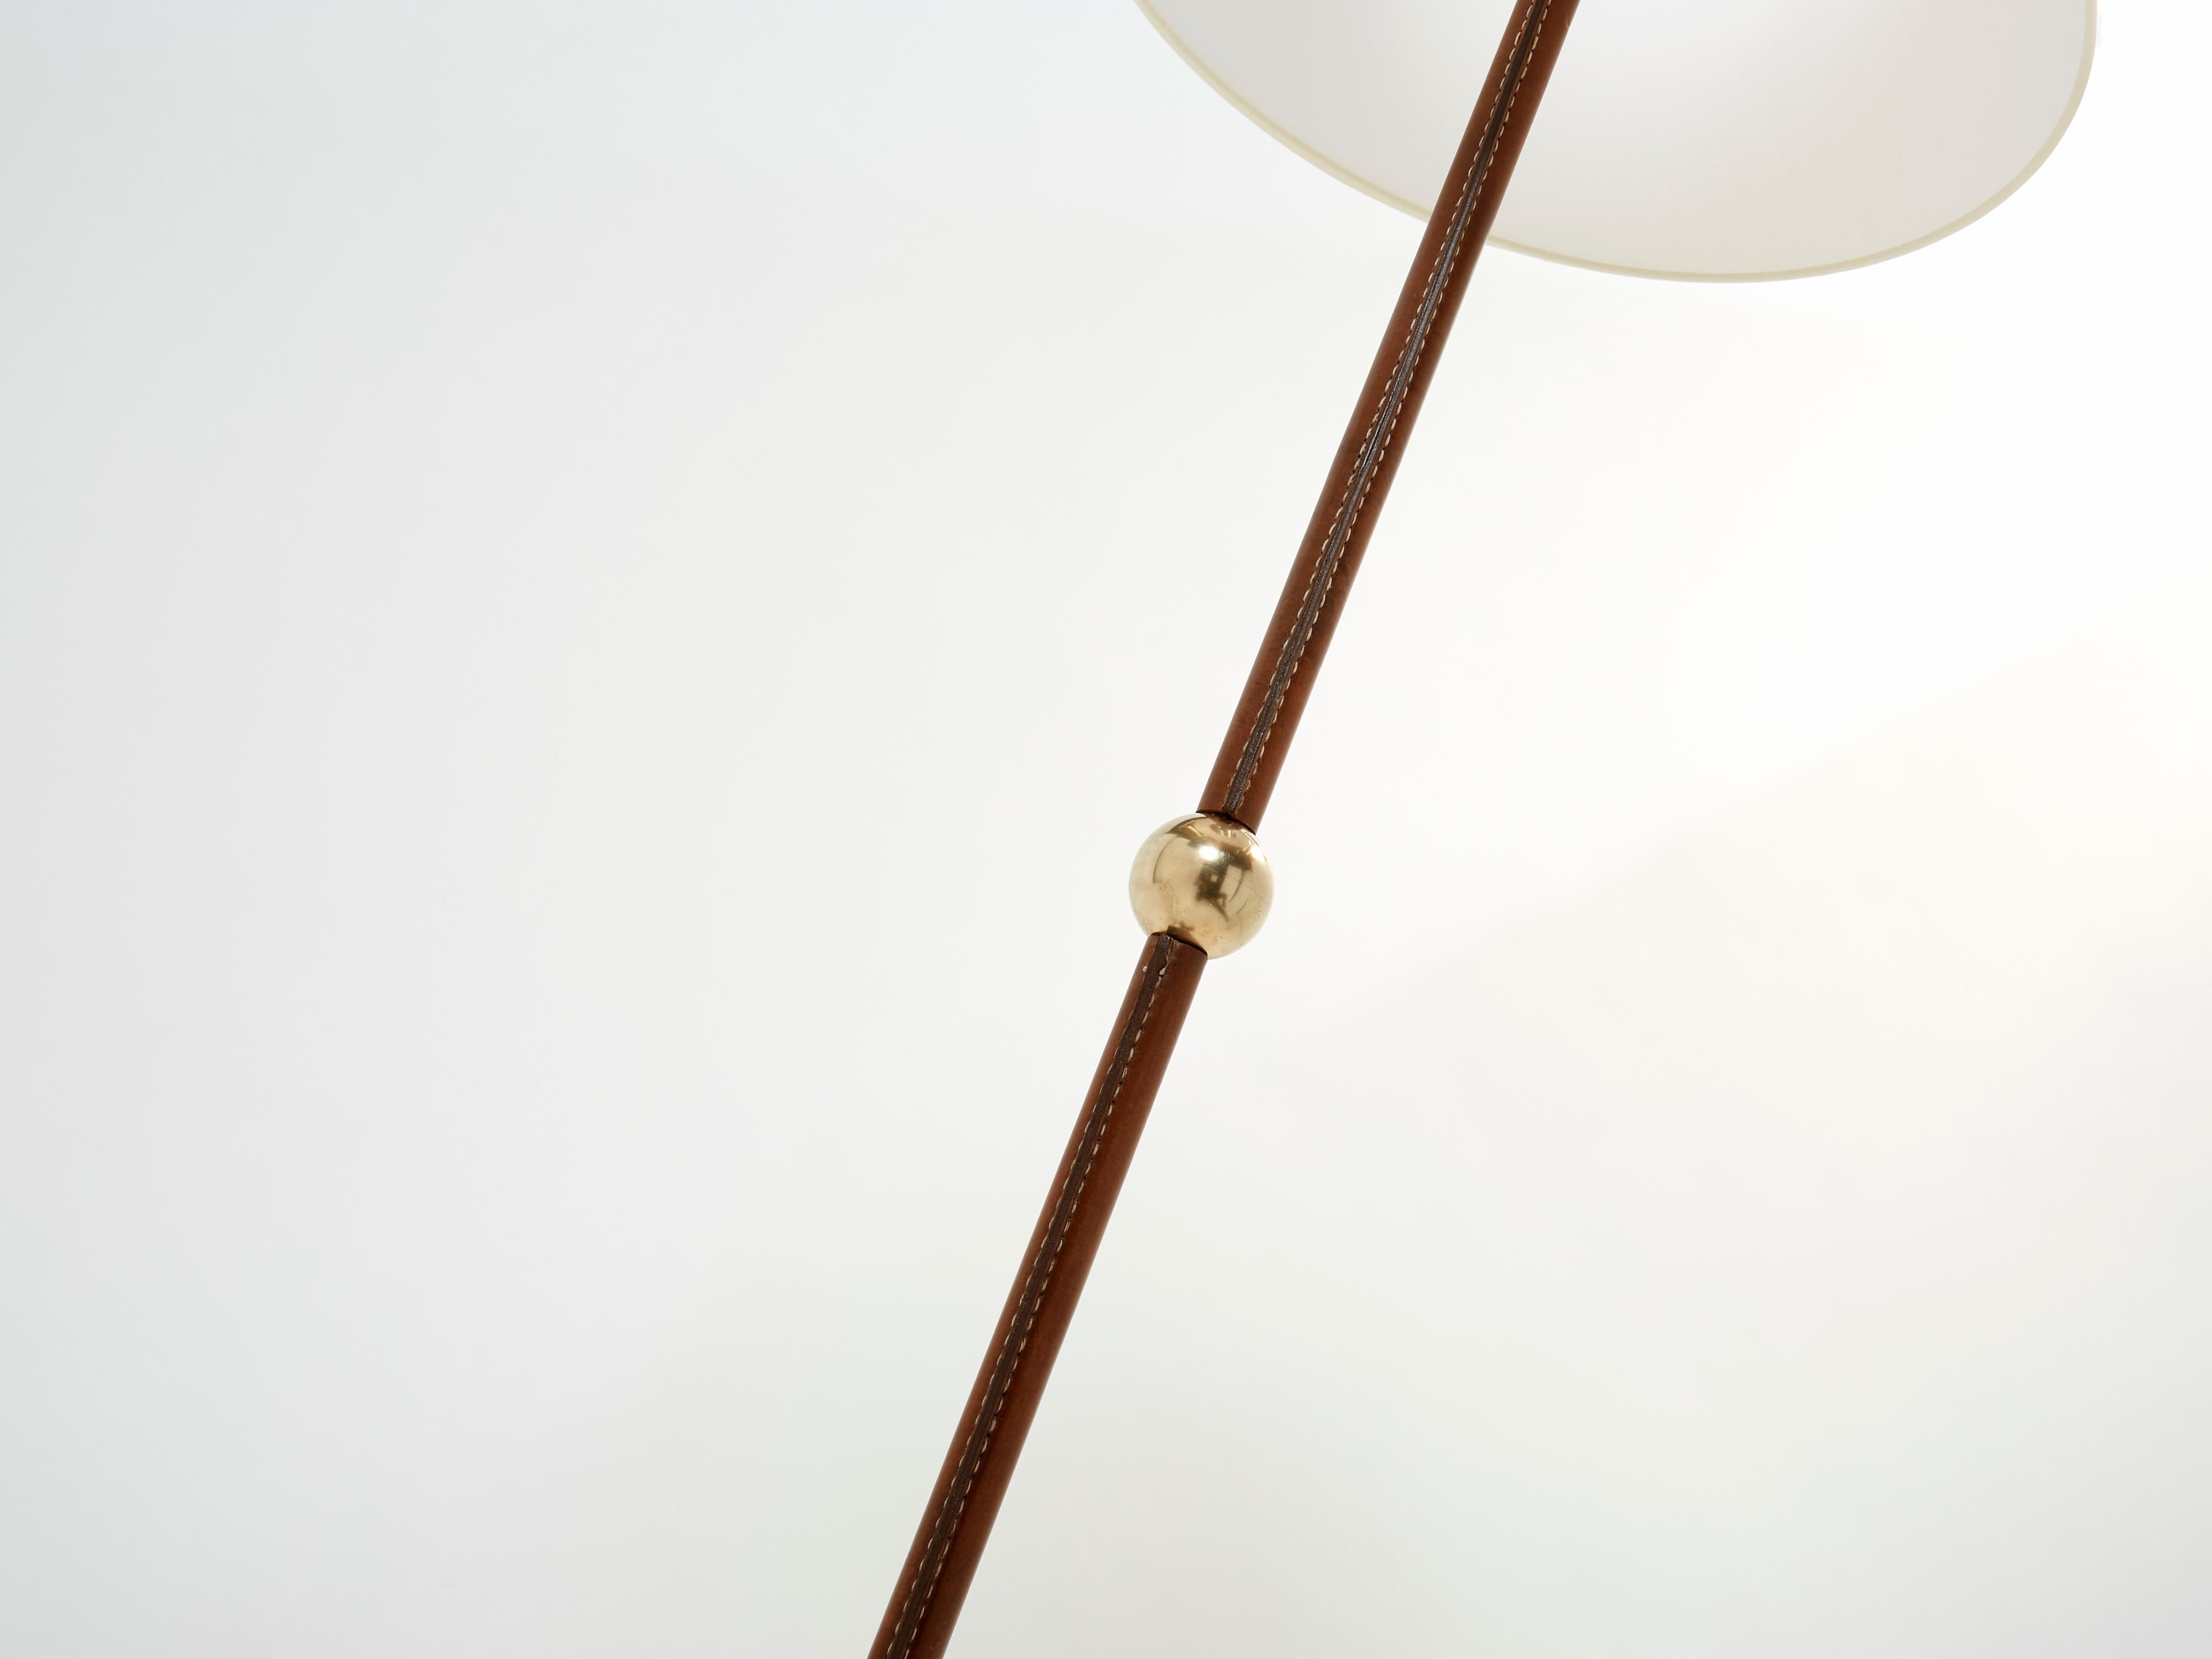 French Jacques Adnet Modernist Stitched Brown Leather Floor Lamp 1950s For Sale